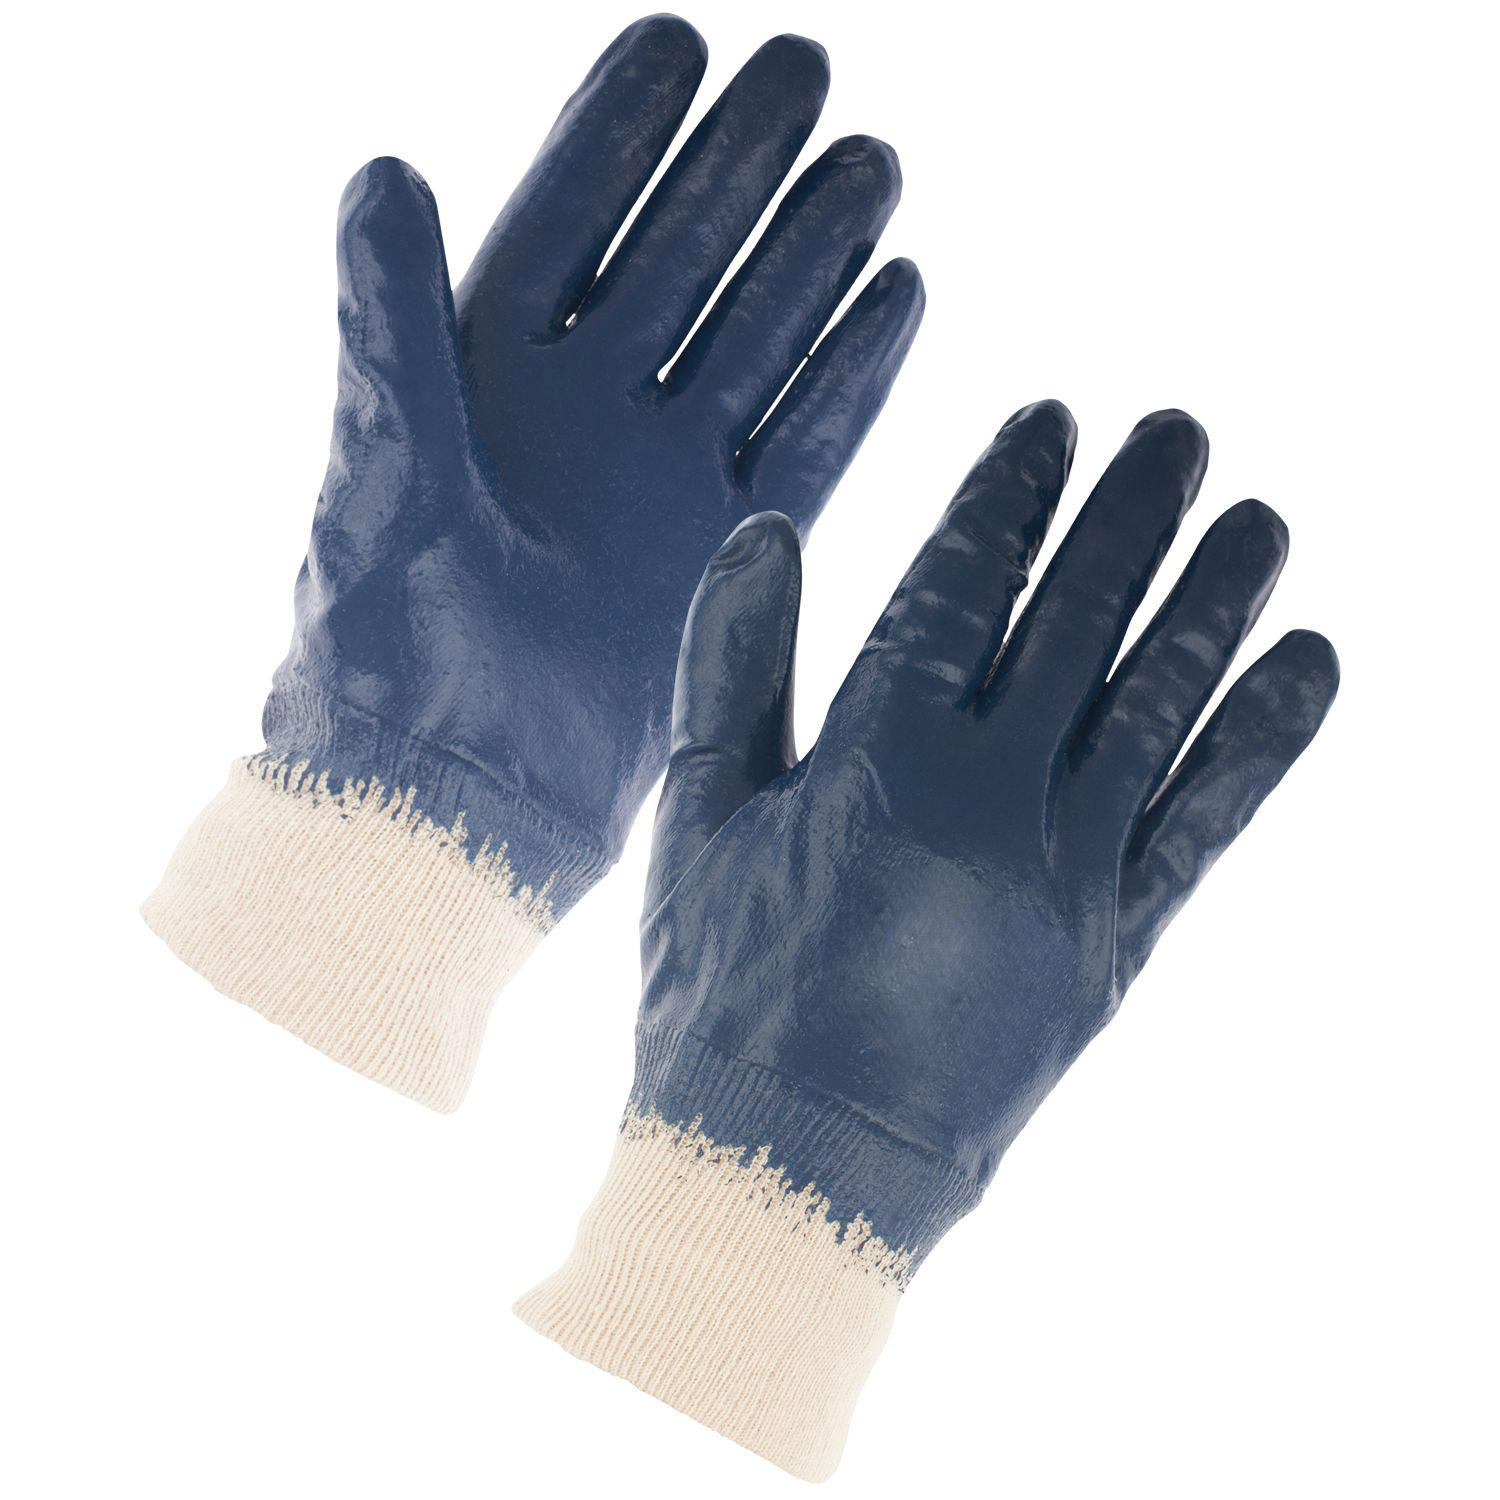 Nitrile Lightweight  Breathable Palm Full Dip Knit Wrist Gloves